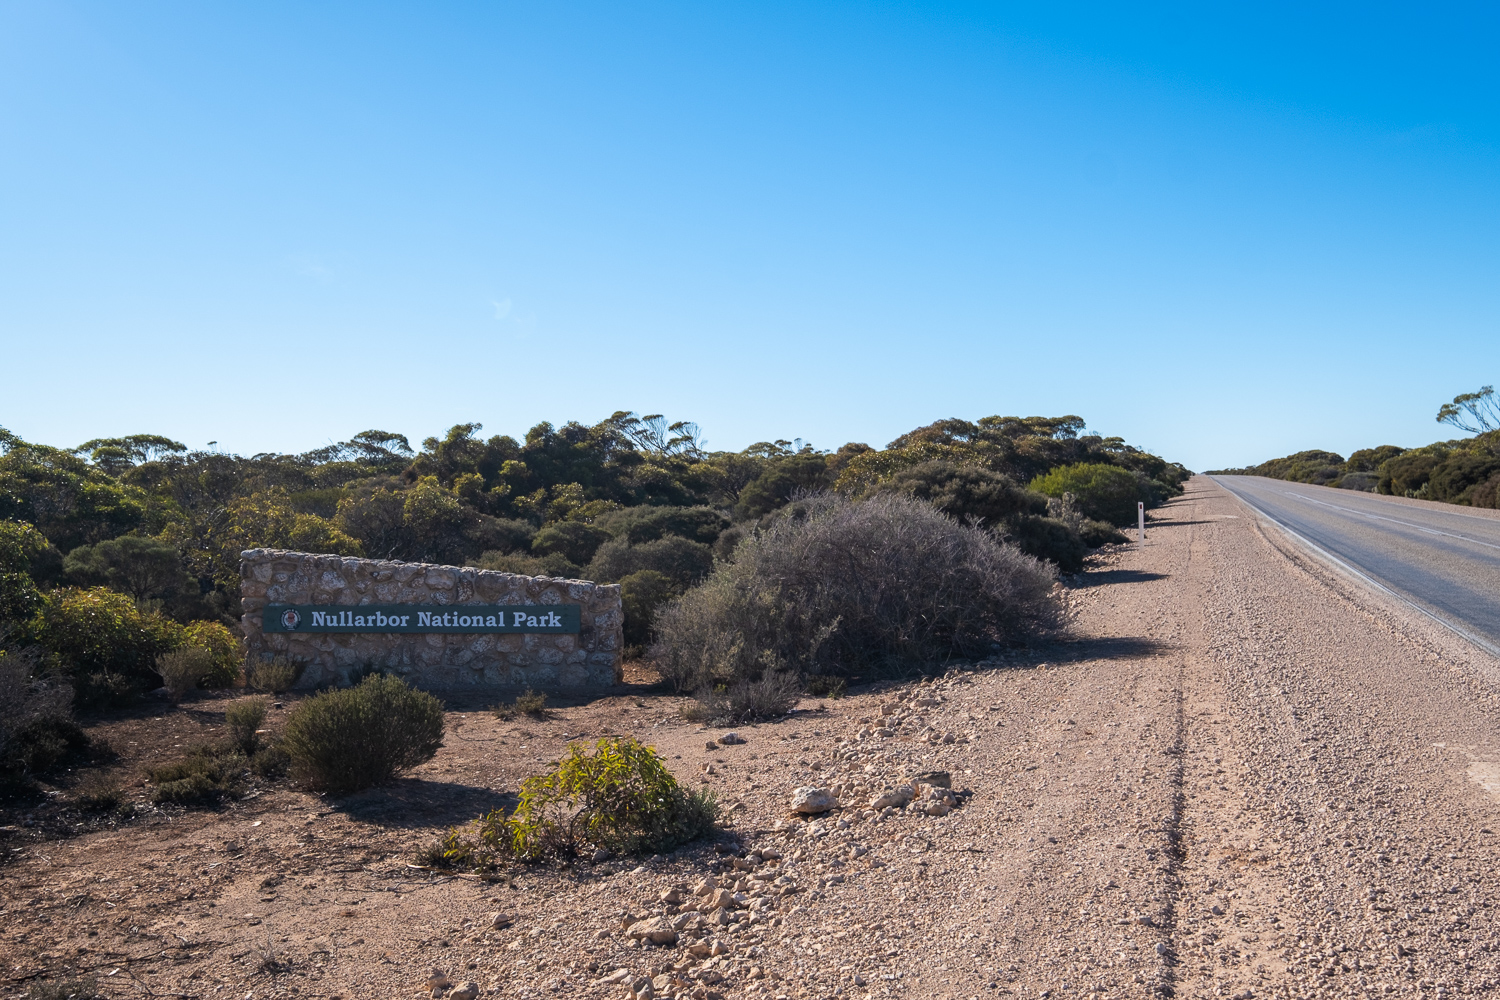   Nullarbor National Park  is a protected area in the Australian state of South Australia located in the locality of Nullarbor about 887 kilometres west of the state capital of Adelaide and about 400 kilometres west of Ceduna. 